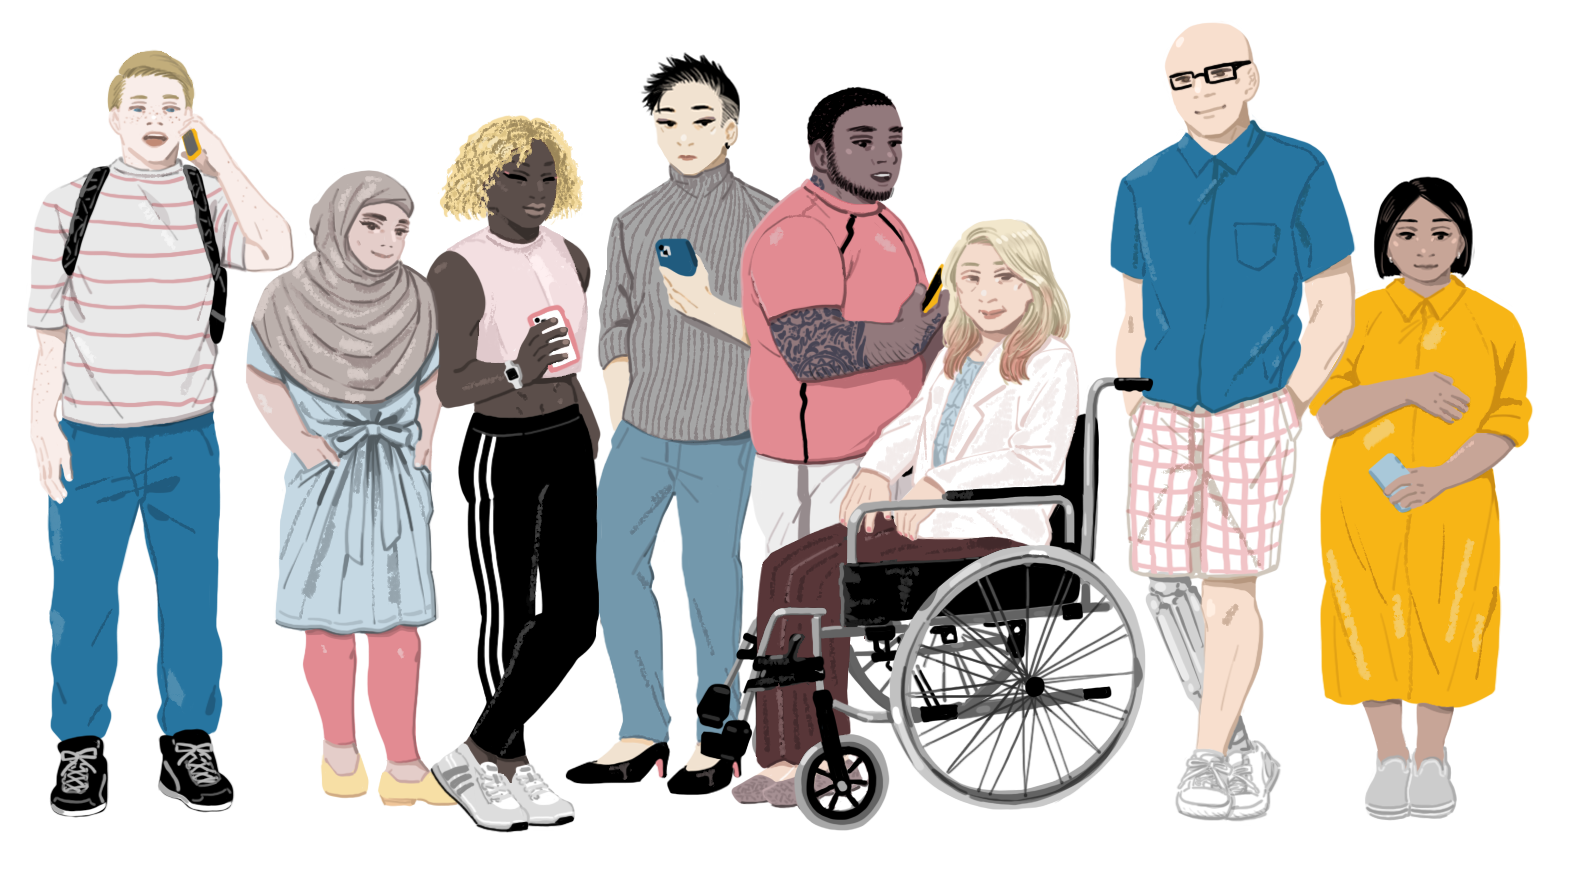 A diverse group of people standing together, with one lady on a wheelchair